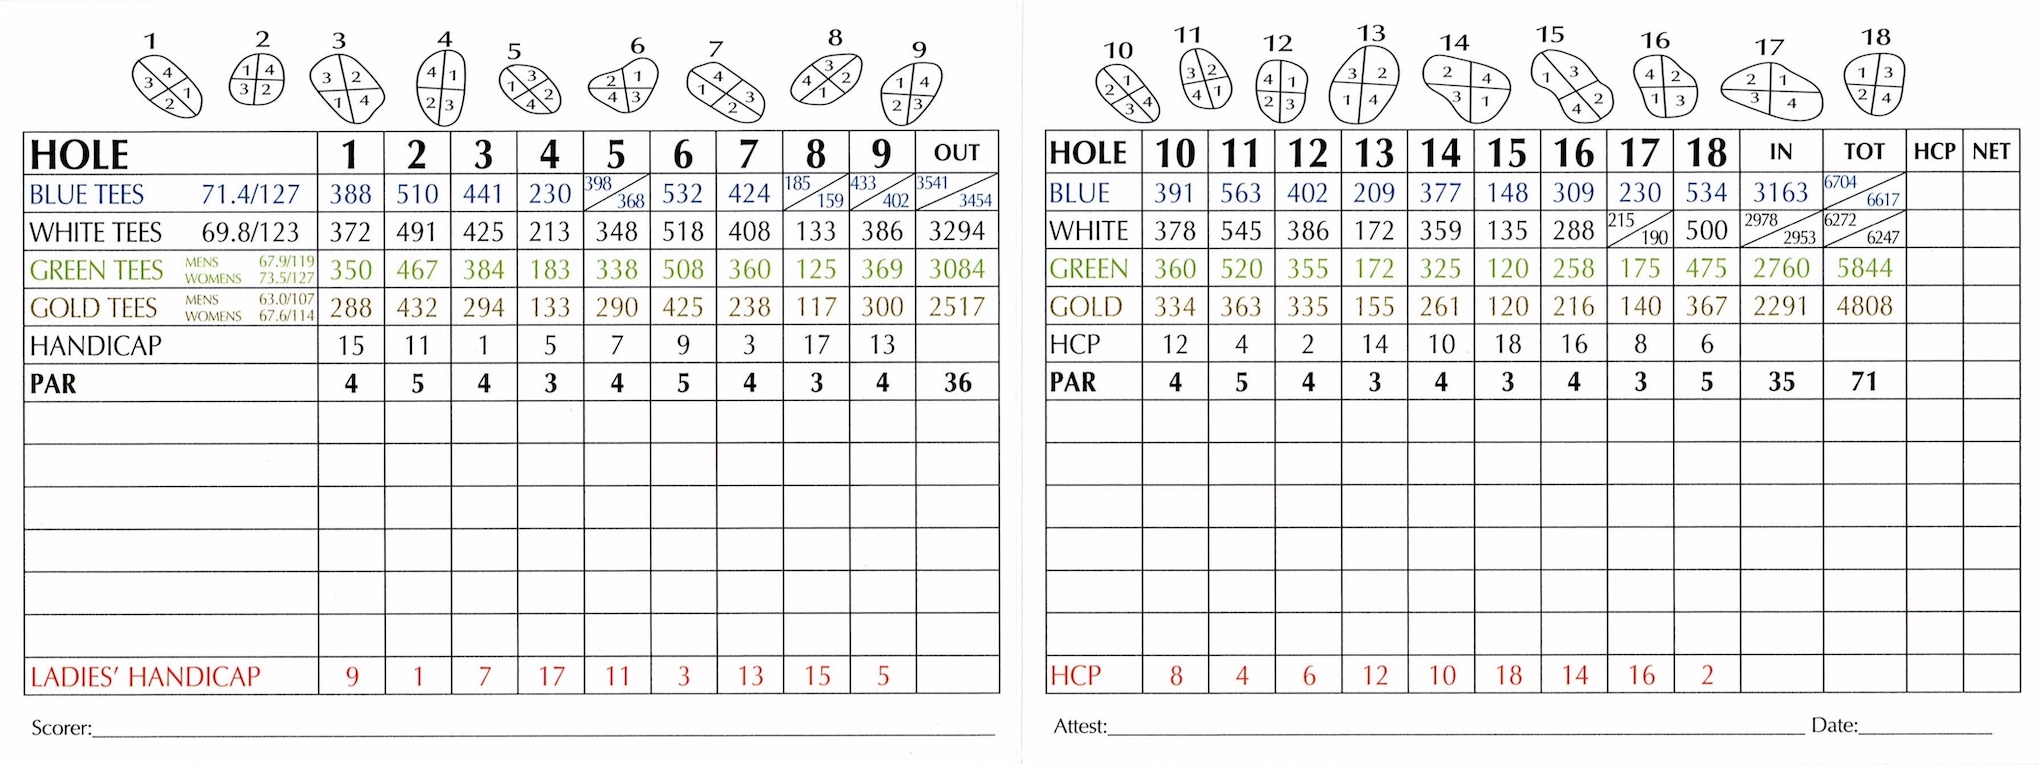 Scan of the scorecard from Wedgewood Golf Course in Plainfield, Illinois. 